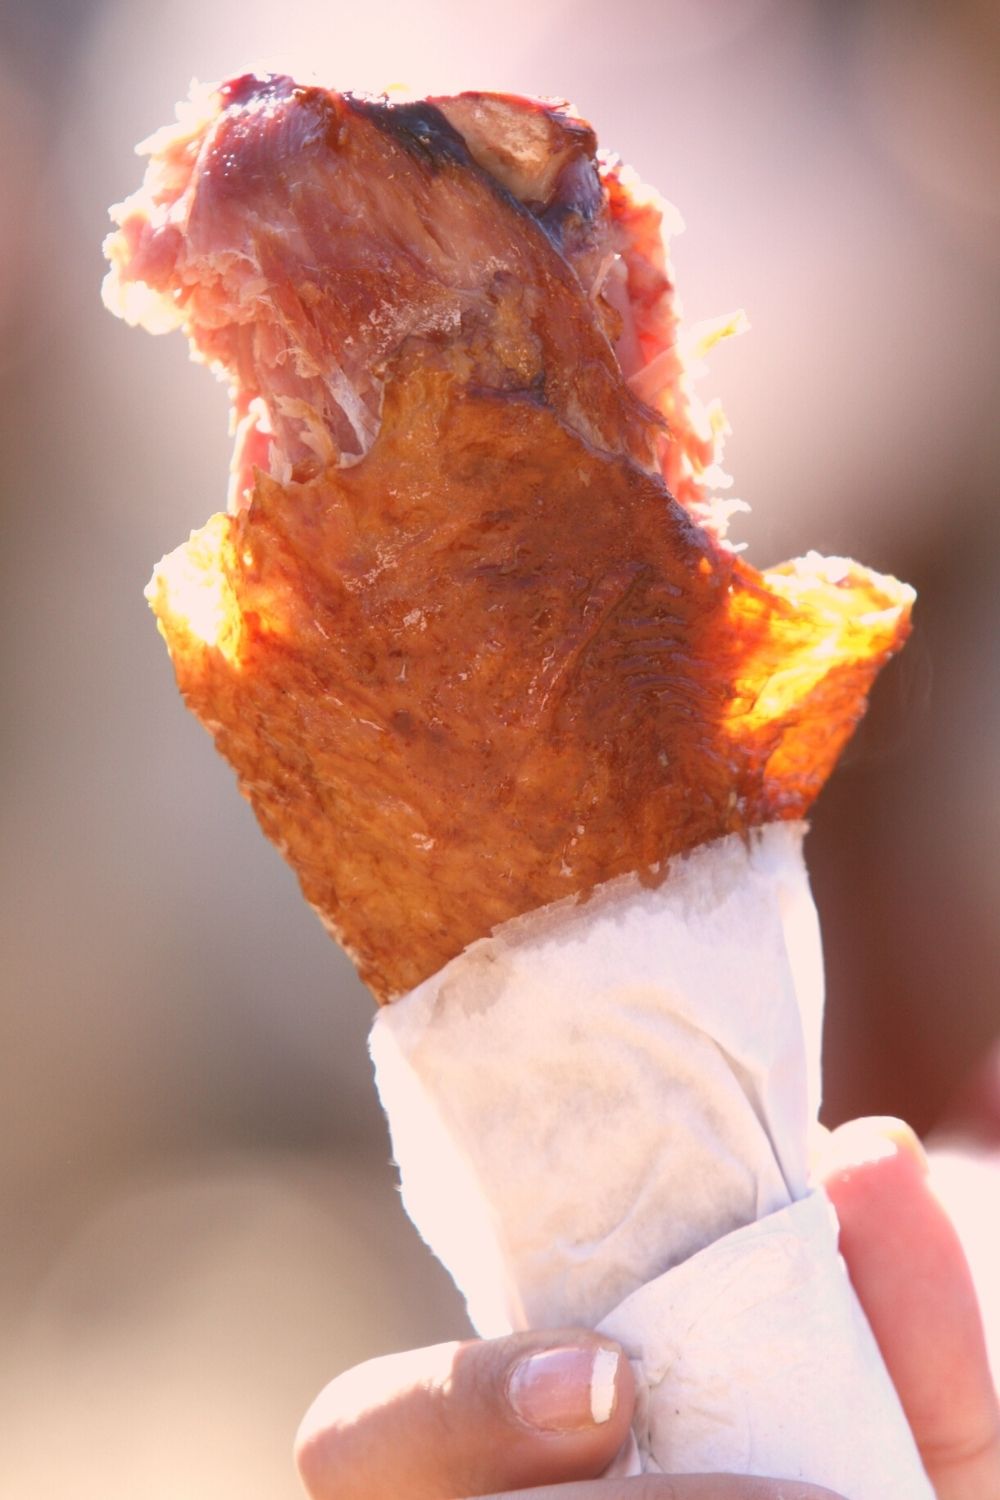 turkey leg at Disney World, which is not a great keto choice